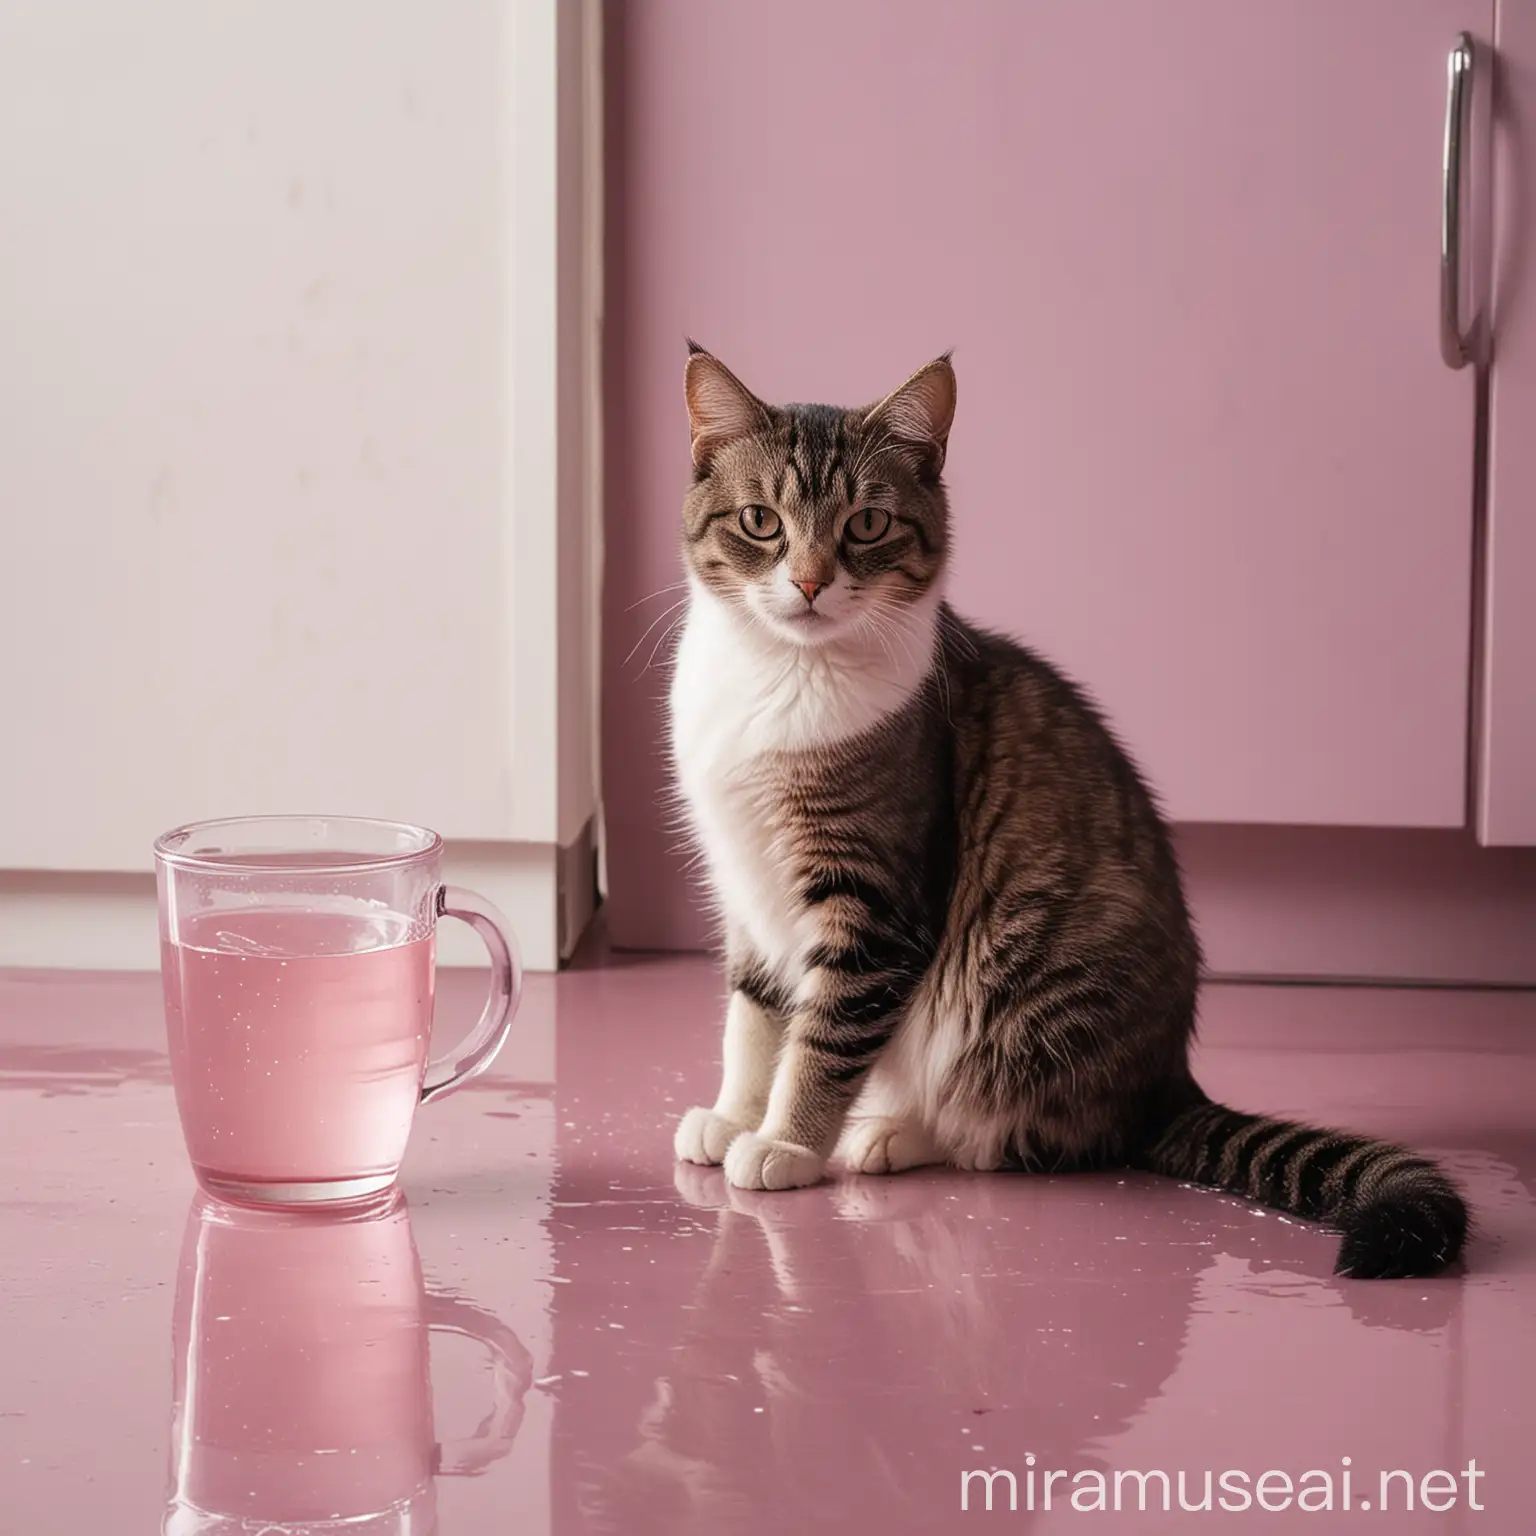 Cat Sitting Beside Water Cup in Purple and Pink Kitchen Setting